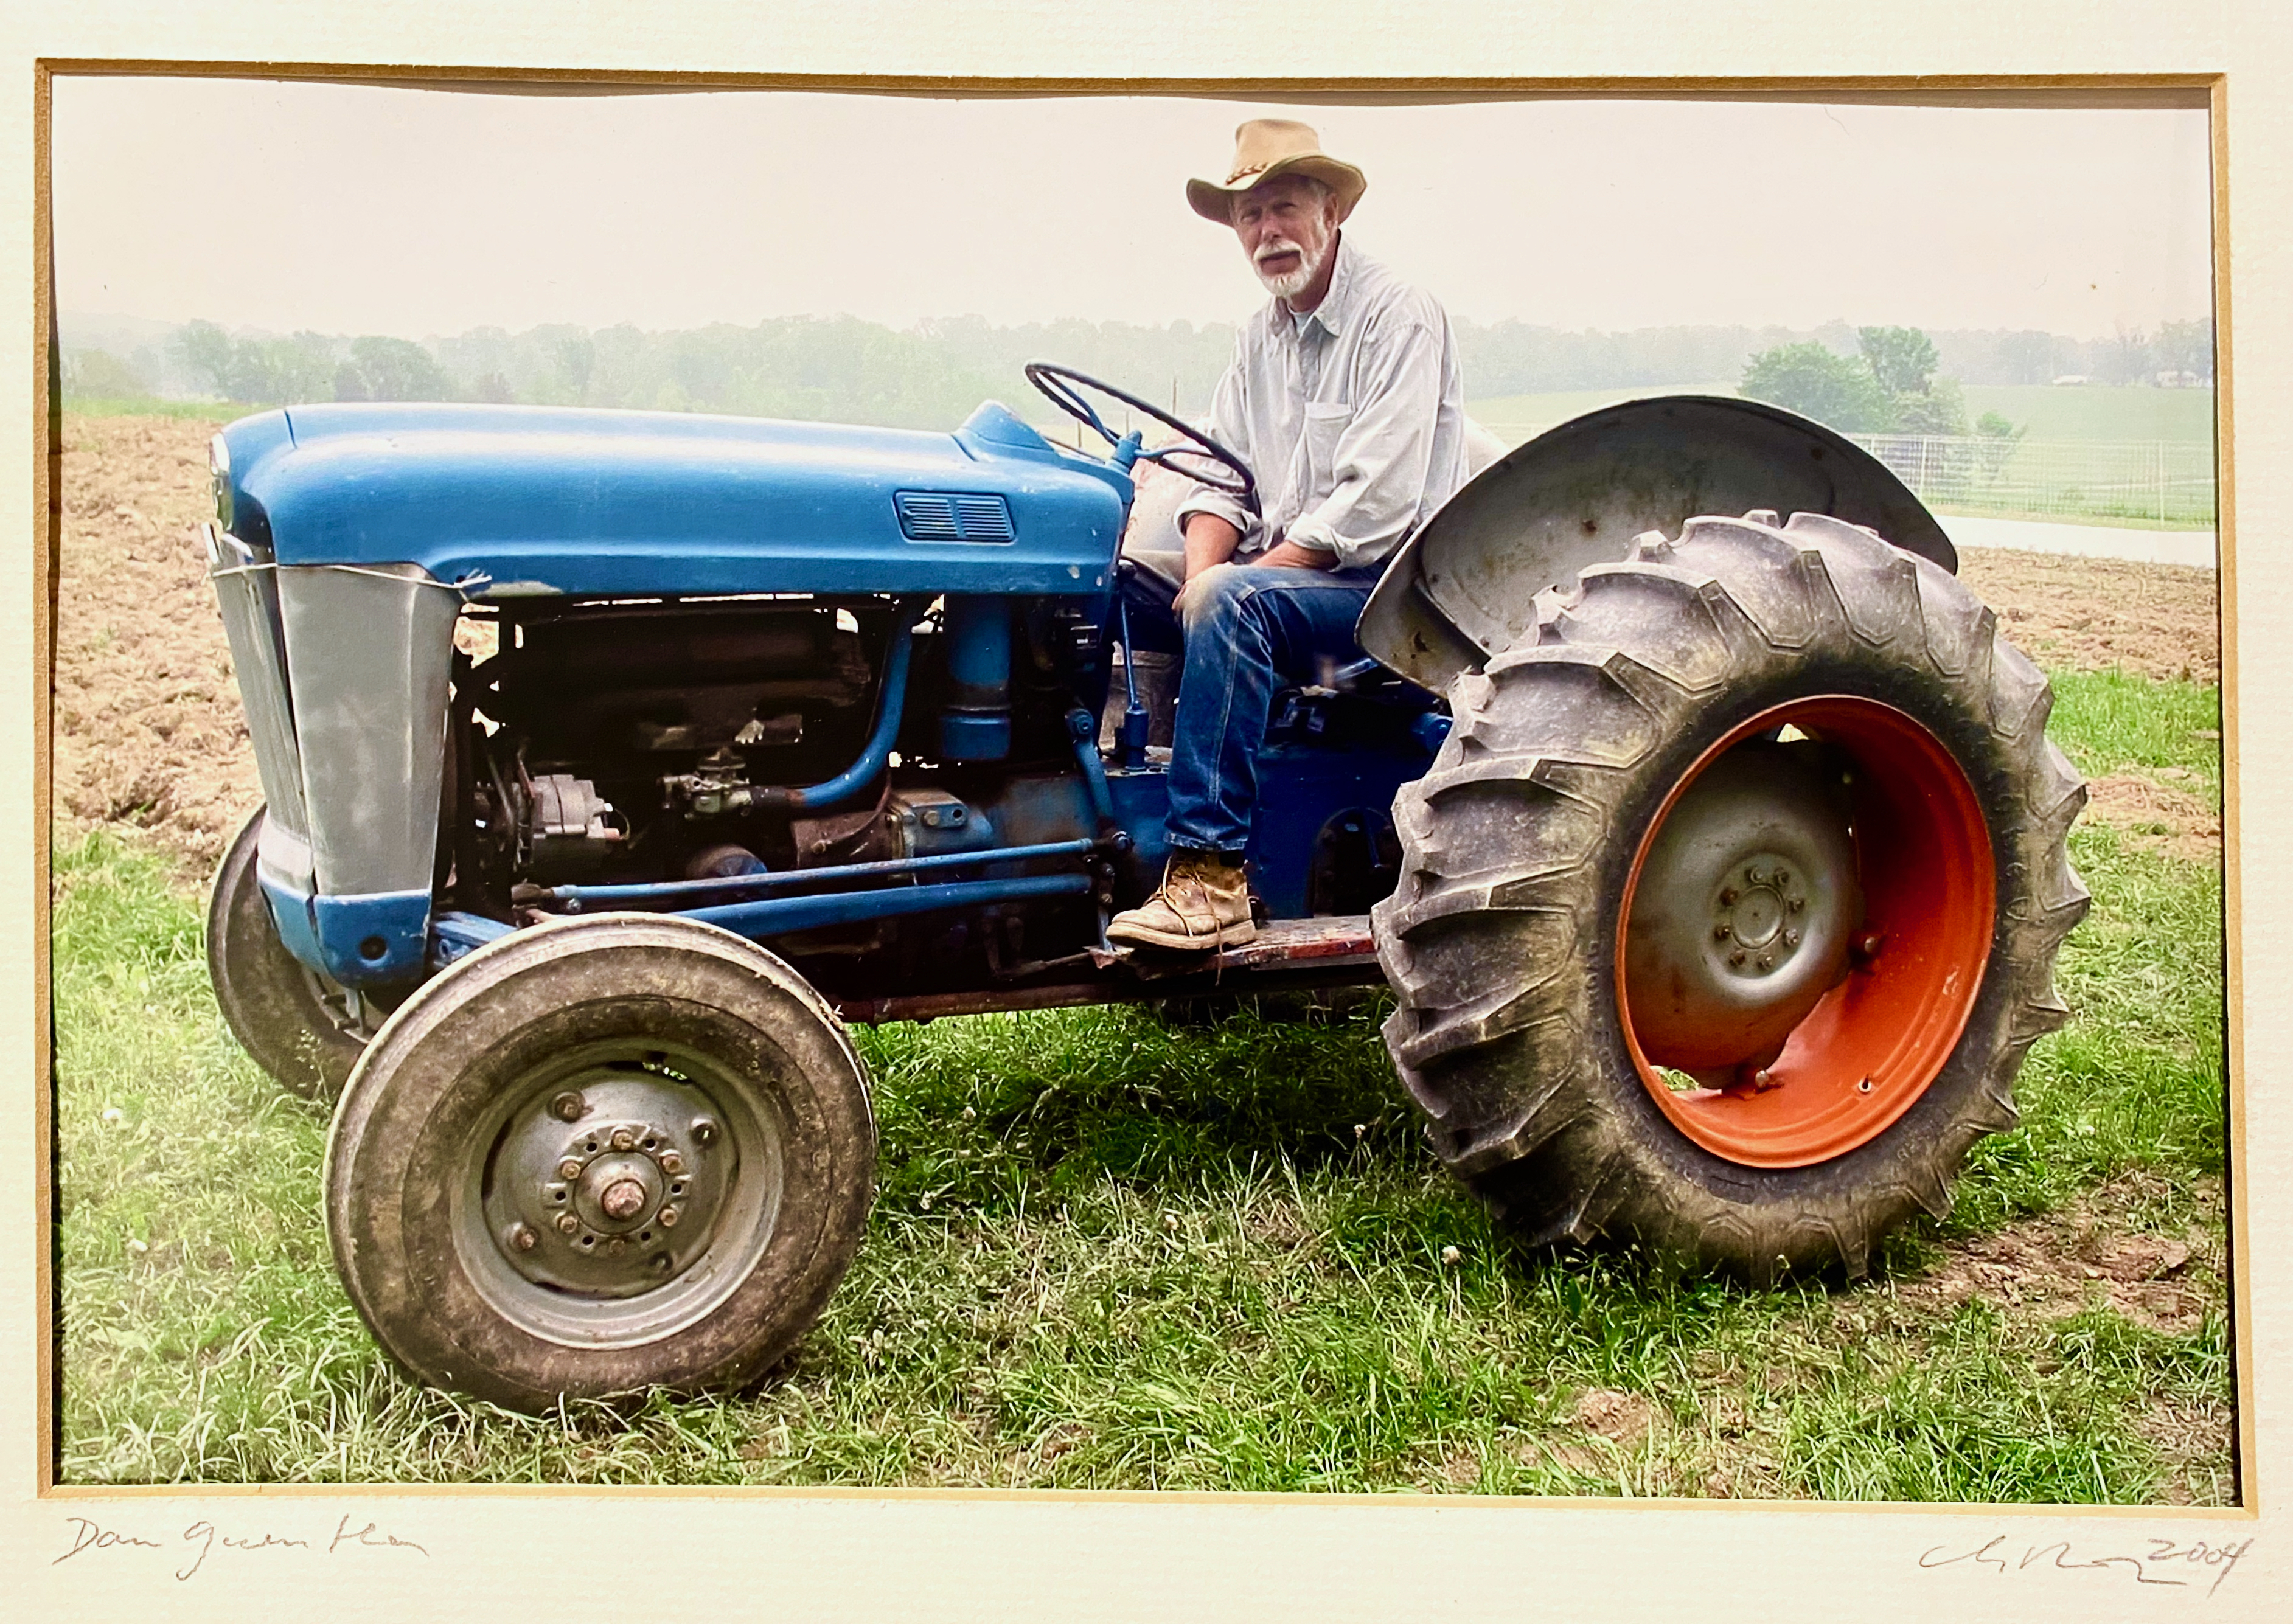 Dan Guenther, a bearded, white-haired man on a blue tractor in a field at Phillies Bridge Farm CSA.